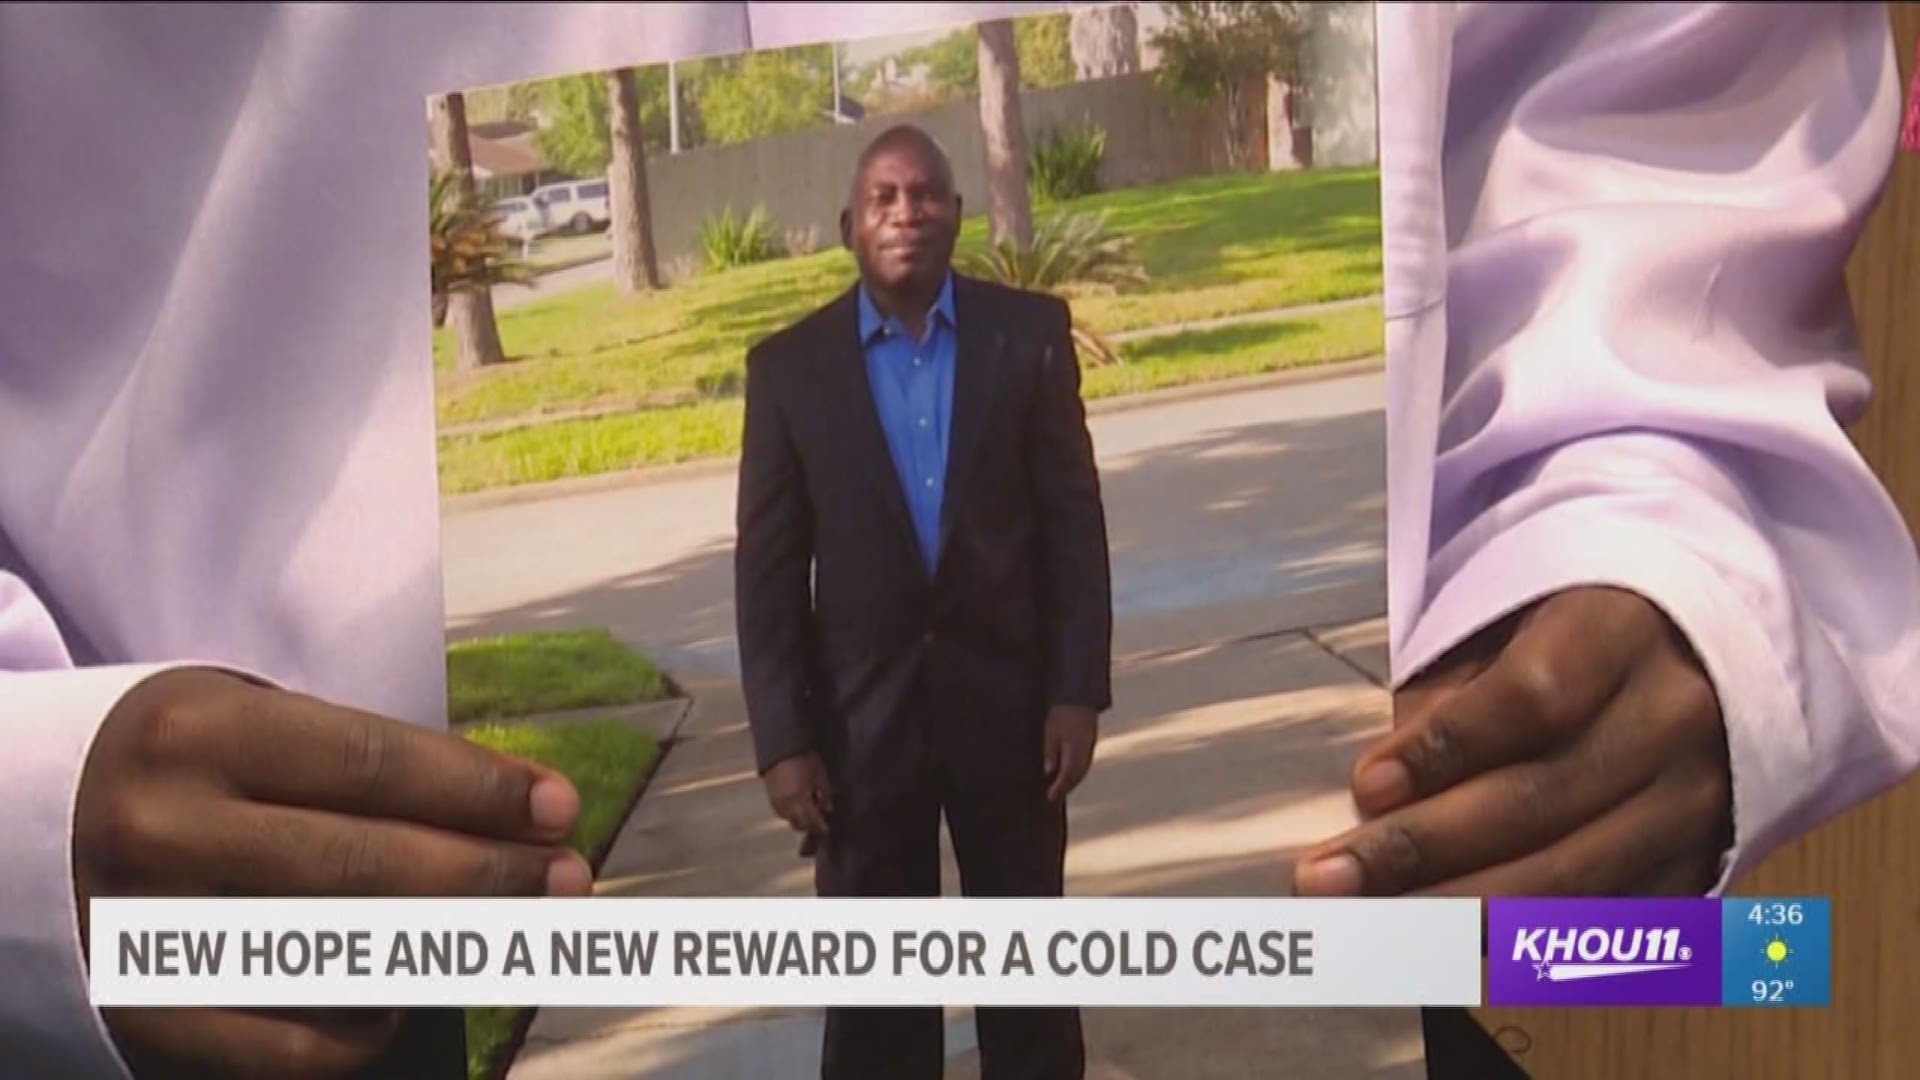 Three years later, a family is seeking answers about who killed an armored truck guard. Crime Stoppers announced an increase in a reward for information on Wednesday.